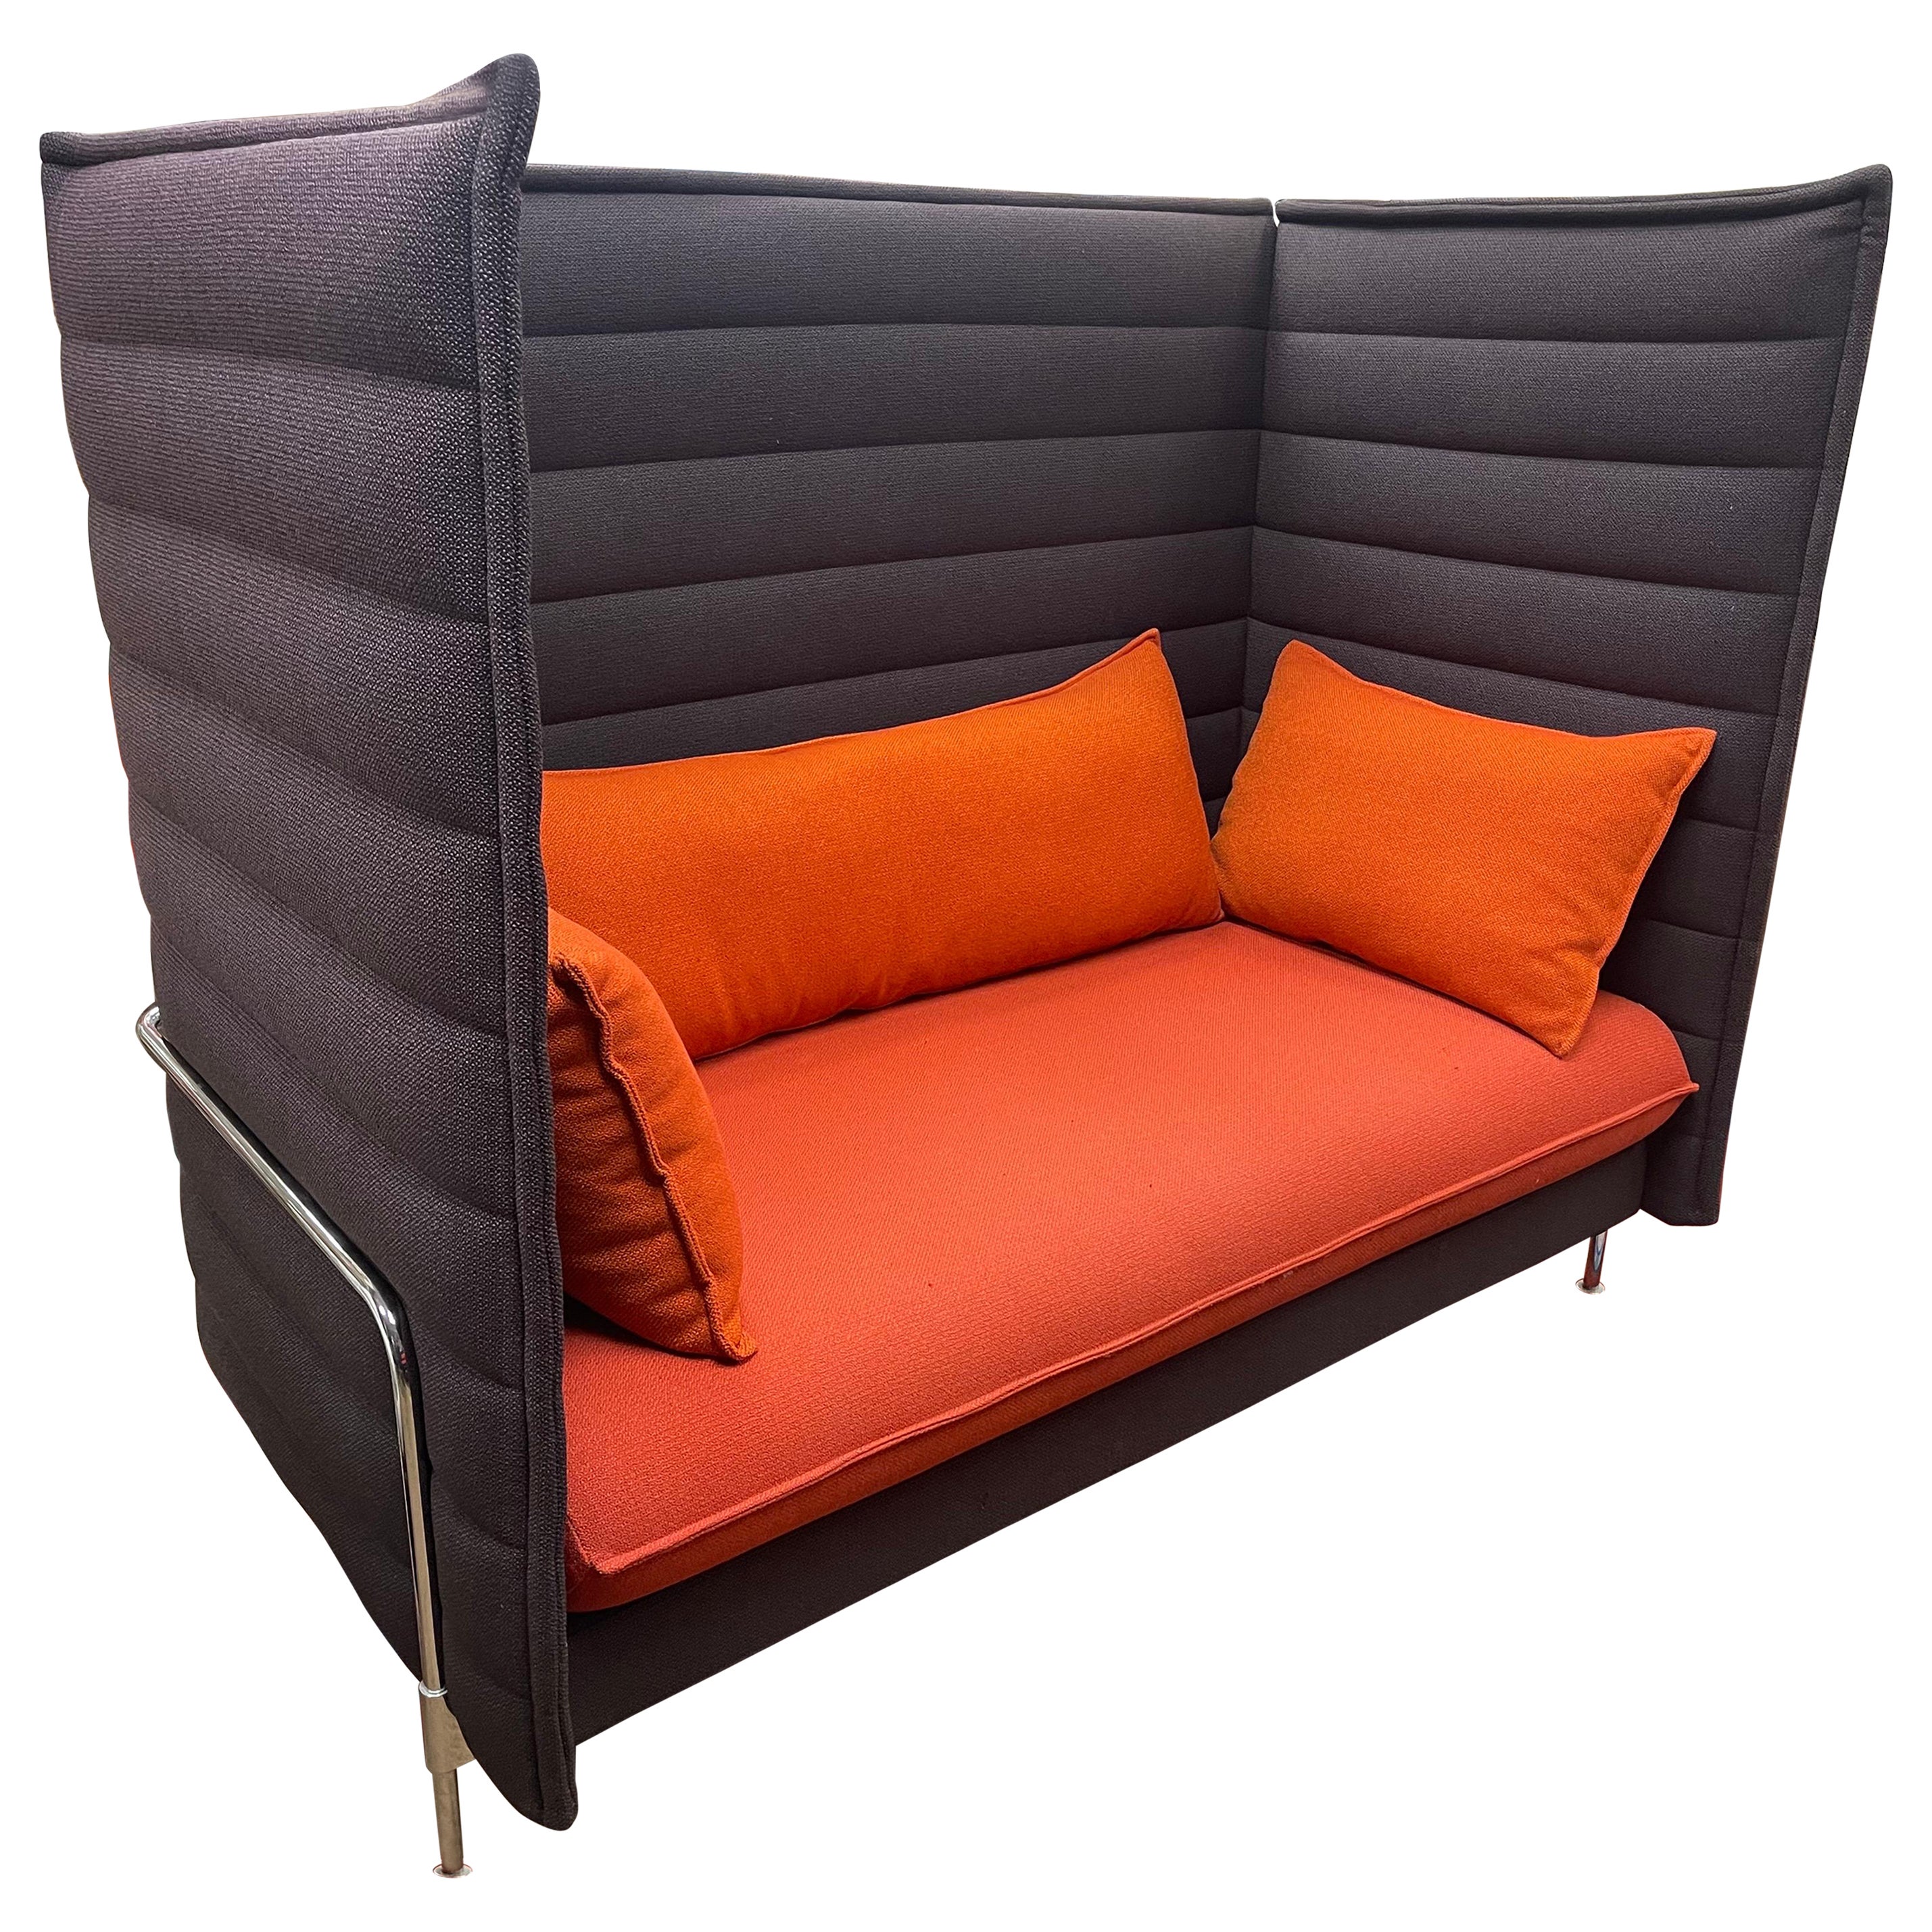 Vitra Coveted Alcove High Back Sofa by Ronan & Erwan Bouroullec 2008